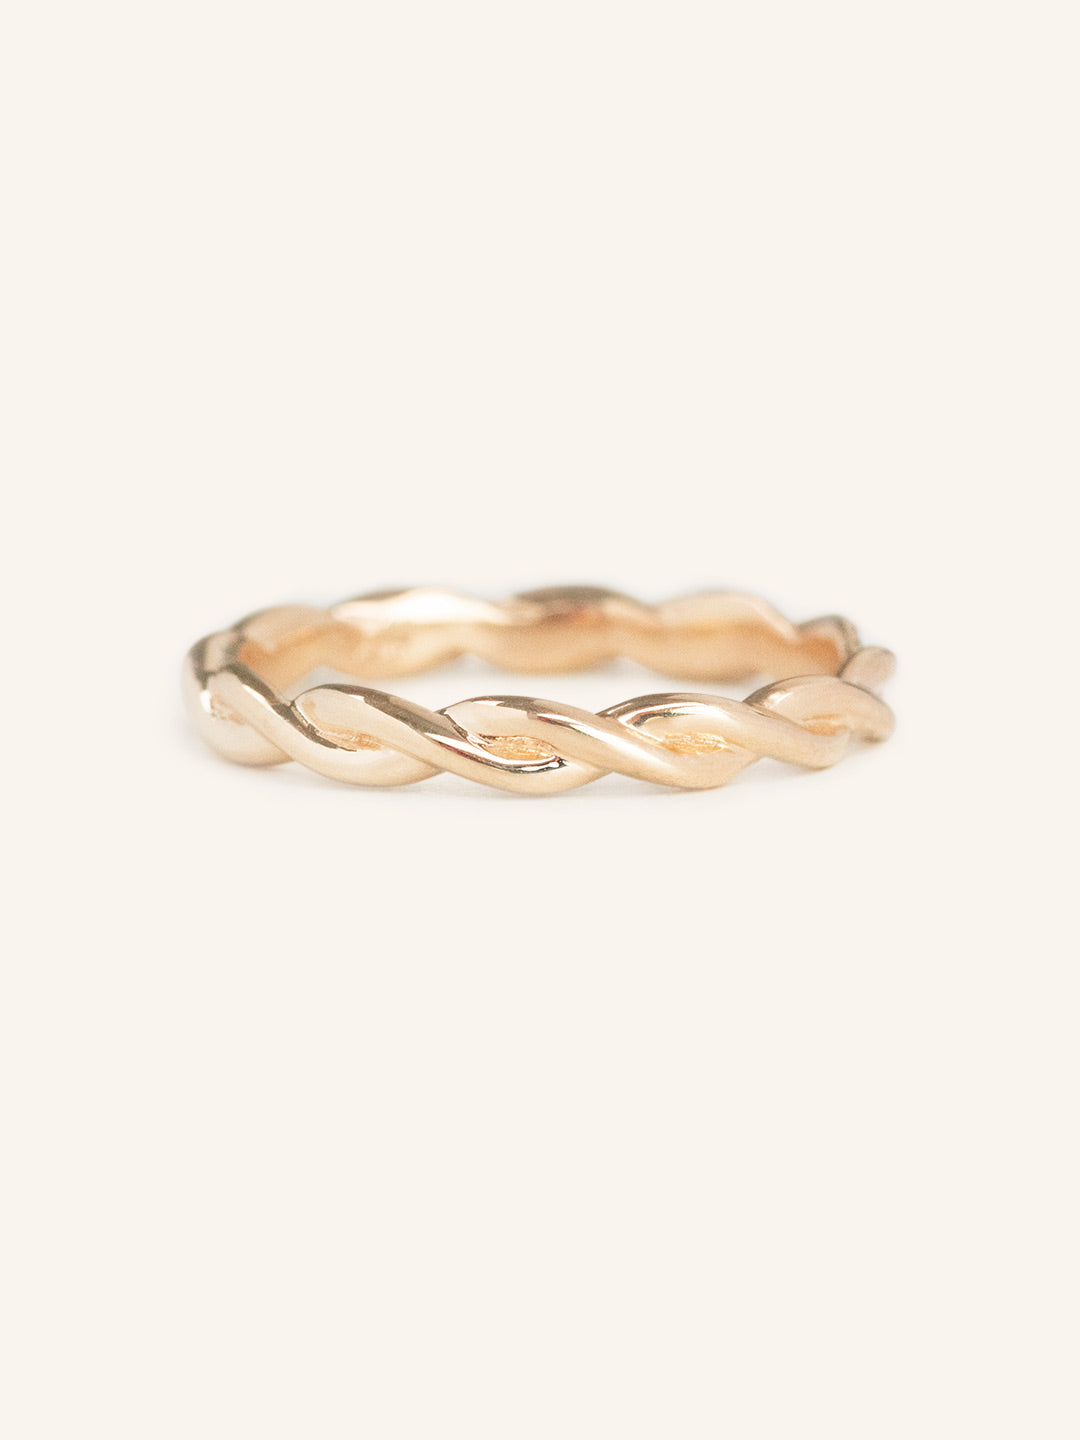 Foxtail Lily Ring